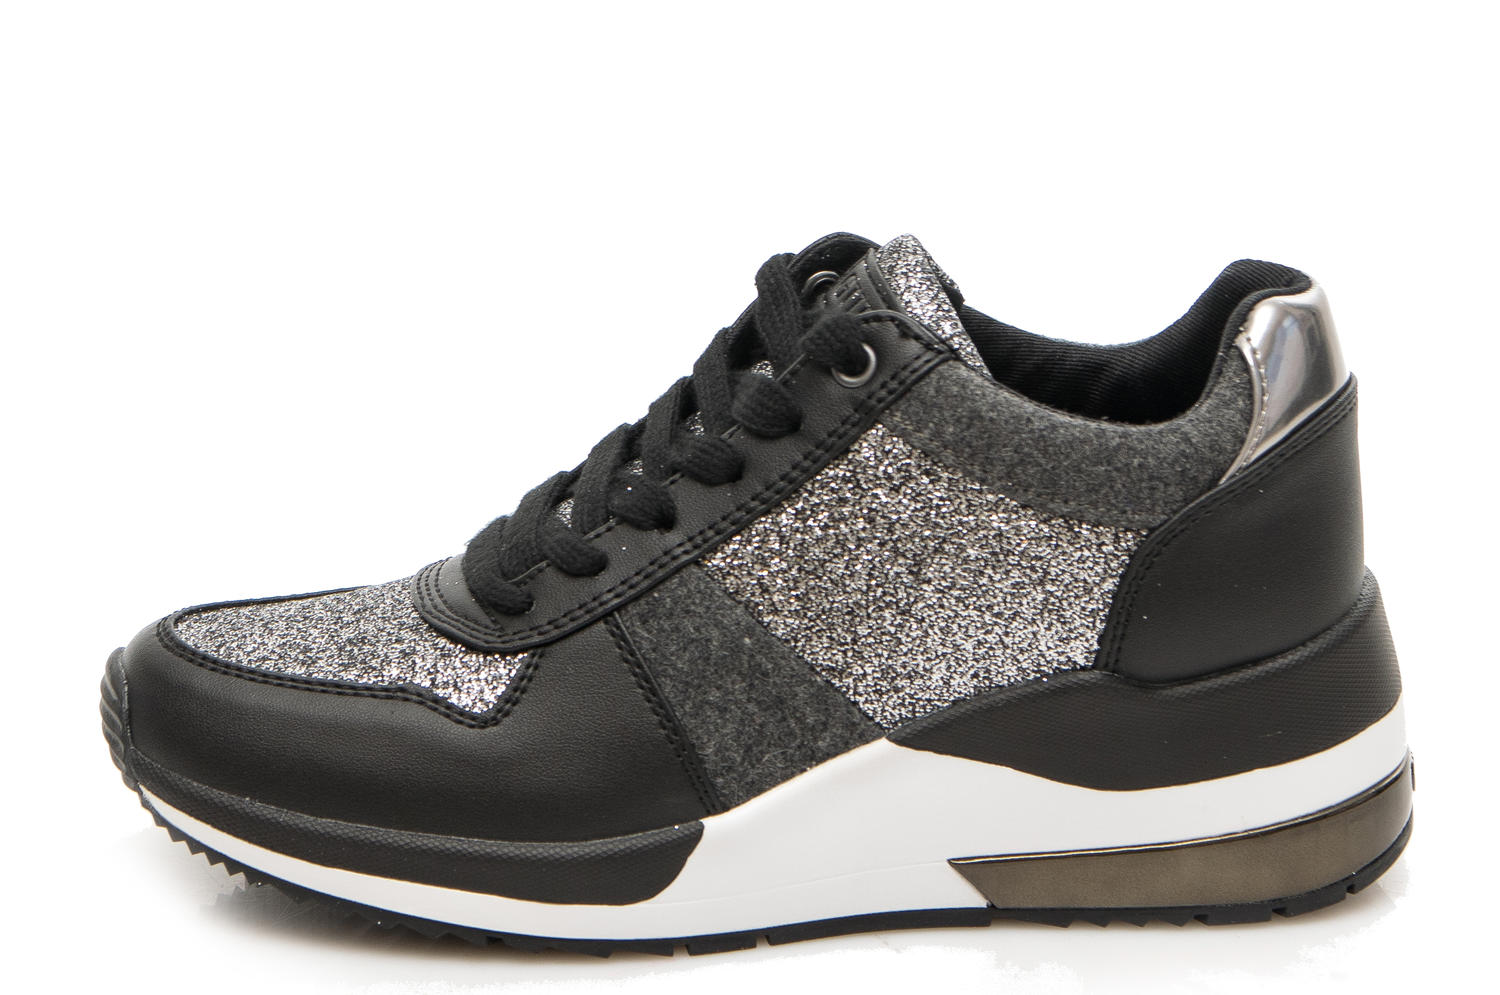 Guess Sneakers Janett Pewter - Shop Online At Best Prices!